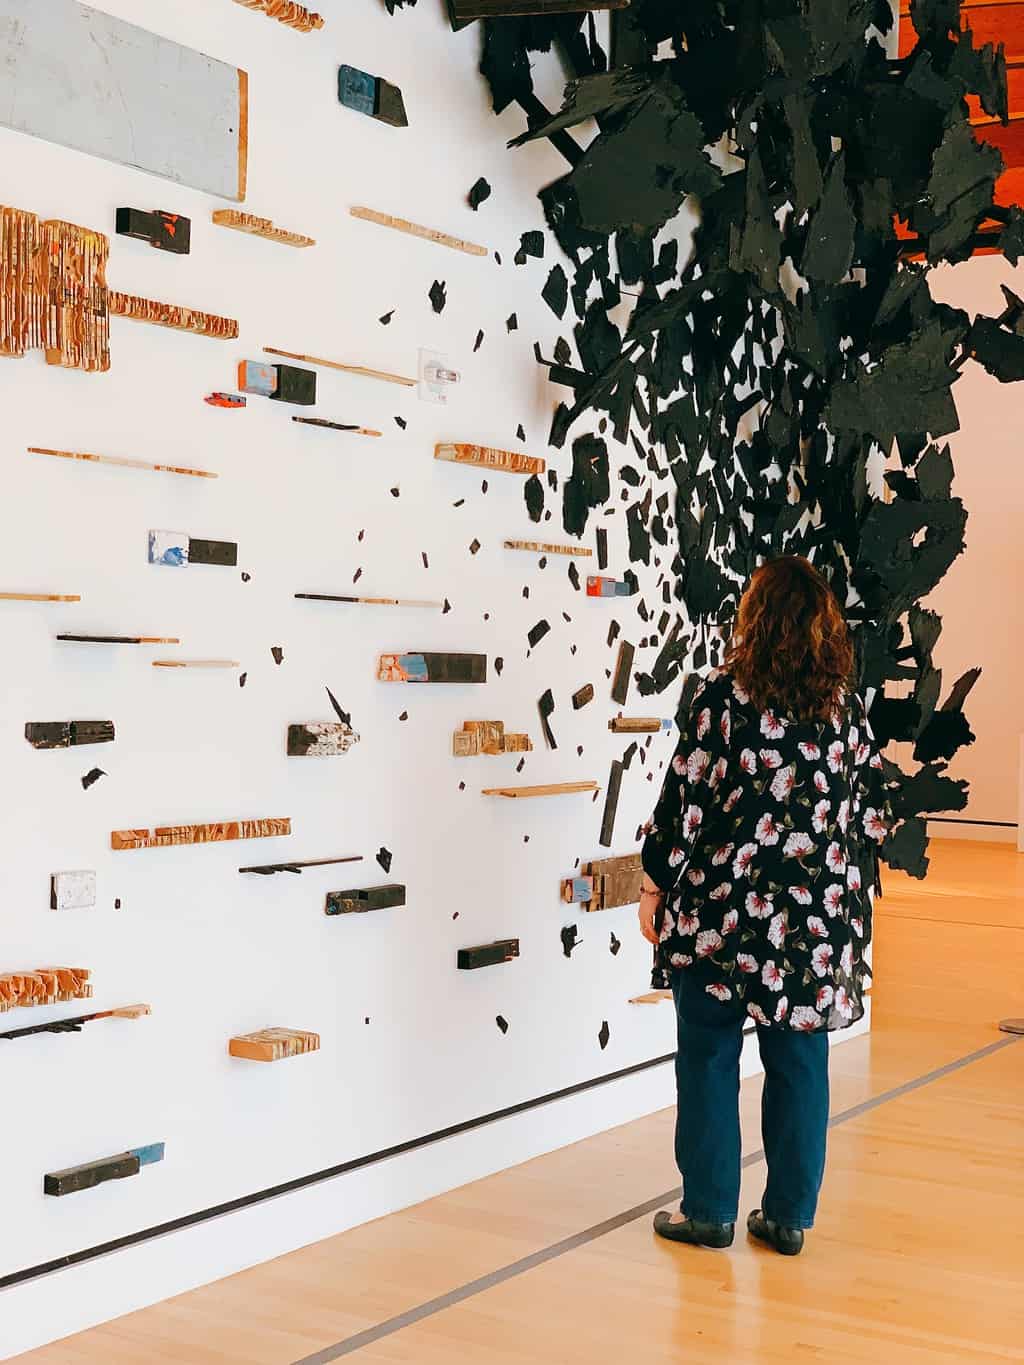 Crystal Bridges Museum of American Art in Arkansas is home to more than 50,000 square feet of gallery space and has a collection worth hundreds of millions of dollars. Best of all, admission is always free!